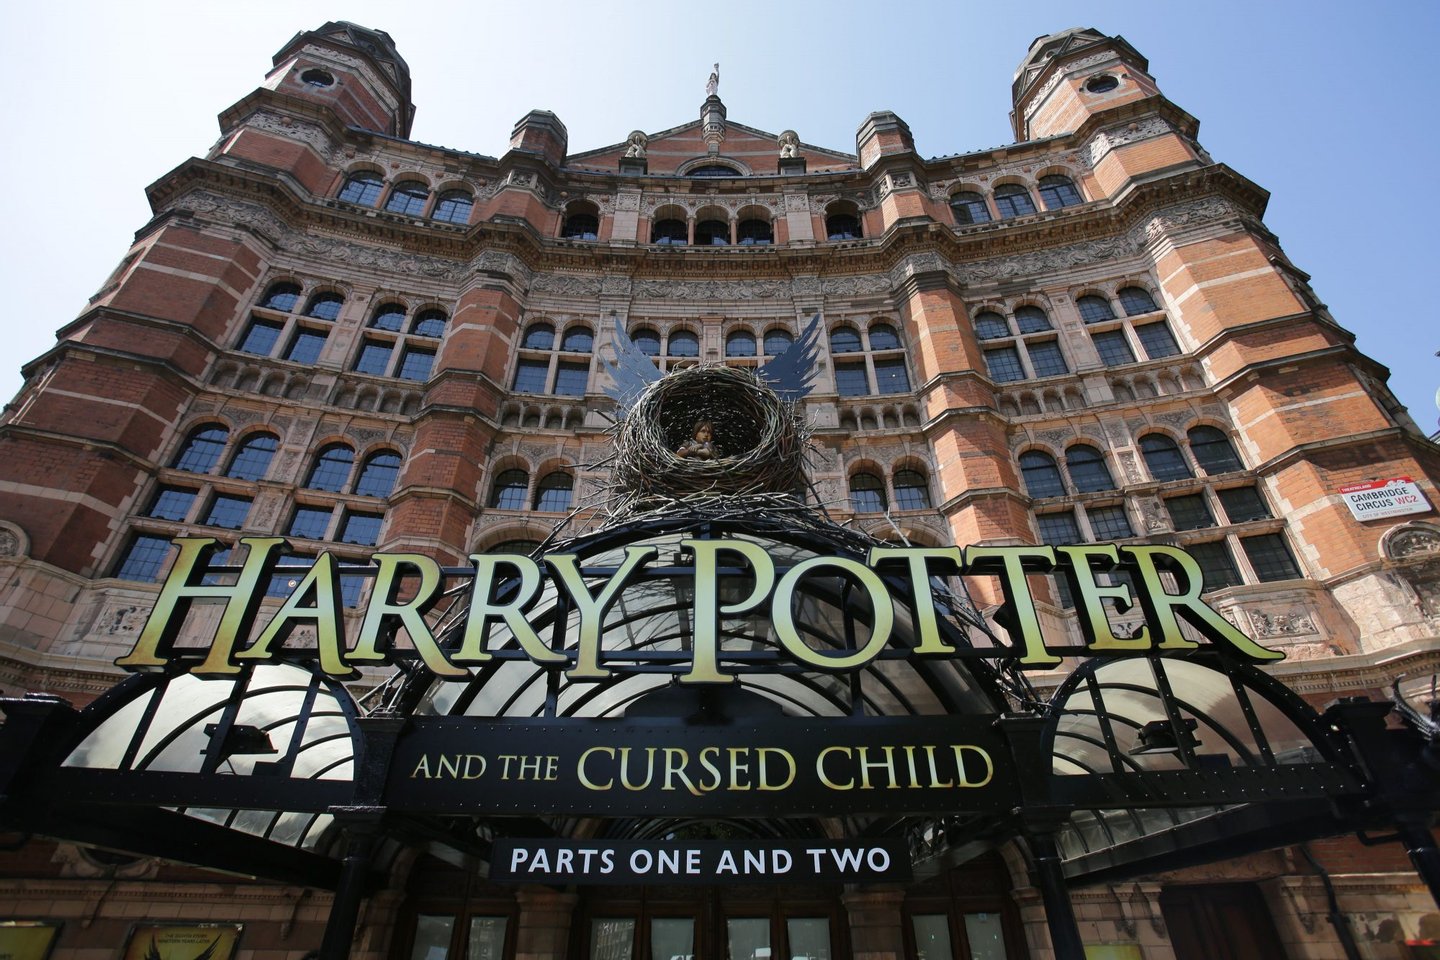 The front of the Palace Theatre promotes its new show 'Harry Potter and the Cursed Child' in London on June 6, 2016. Harry Potter makes his stage debut on June 7 in a new London play that imagines the fictional boy wizard as a father of three, in the latest offshoot of the globally successful franchise. / AFP / DANIEL LEAL-OLIVAS / TO GO WITH AFP STORY BY EDOUARD GUIHAIRE (Photo credit should read DANIEL LEAL-OLIVAS/AFP/Getty Images)